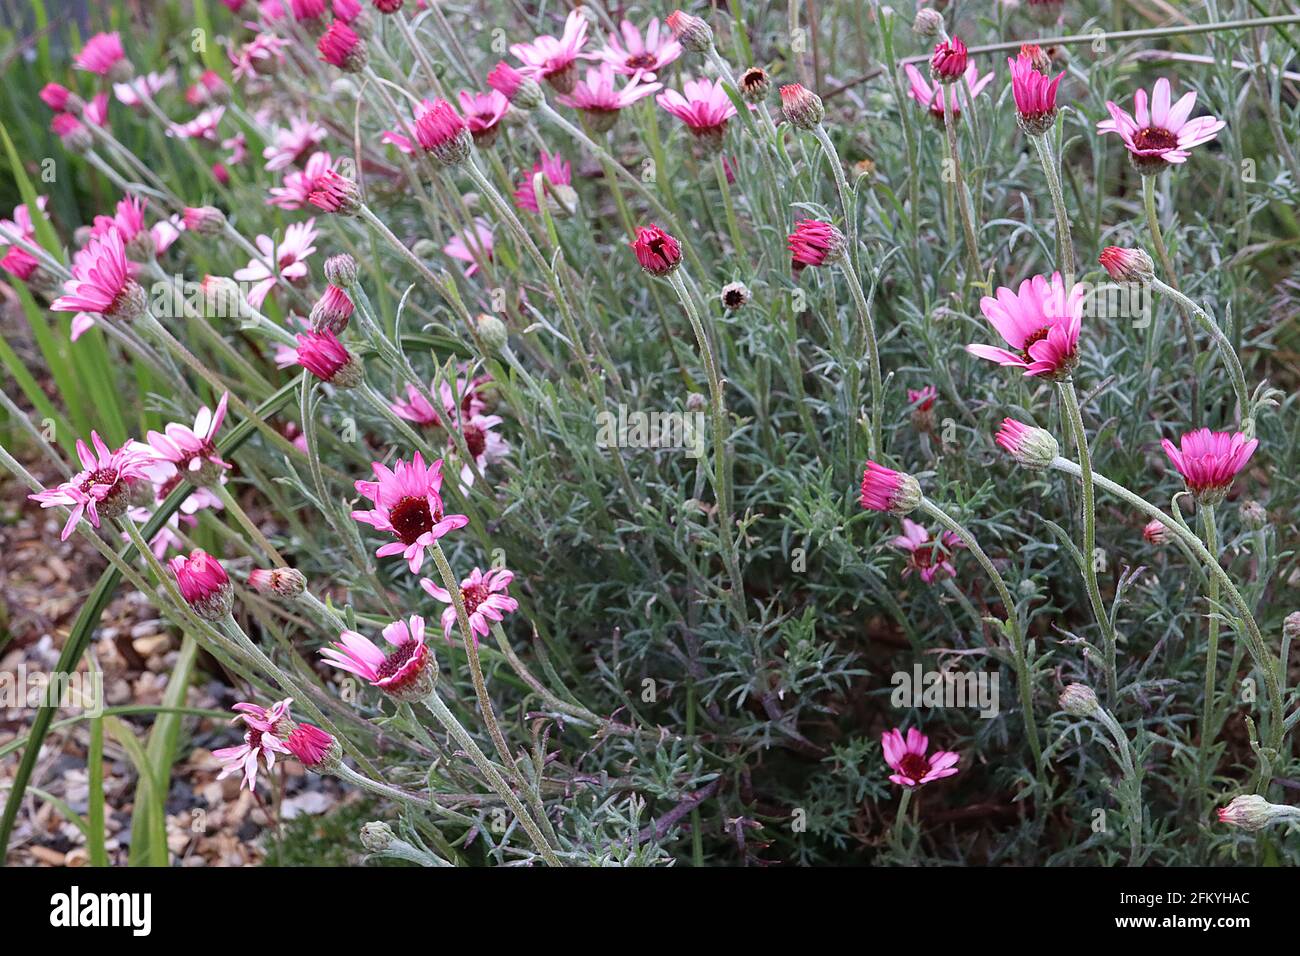 Rhodanthemum gayanum ‘Pretty in Pink’ Moroccan daisy Pretty in Pink – pink daisy-like flowers atop silvery green finely divided leaves,  May, England, Stock Photo